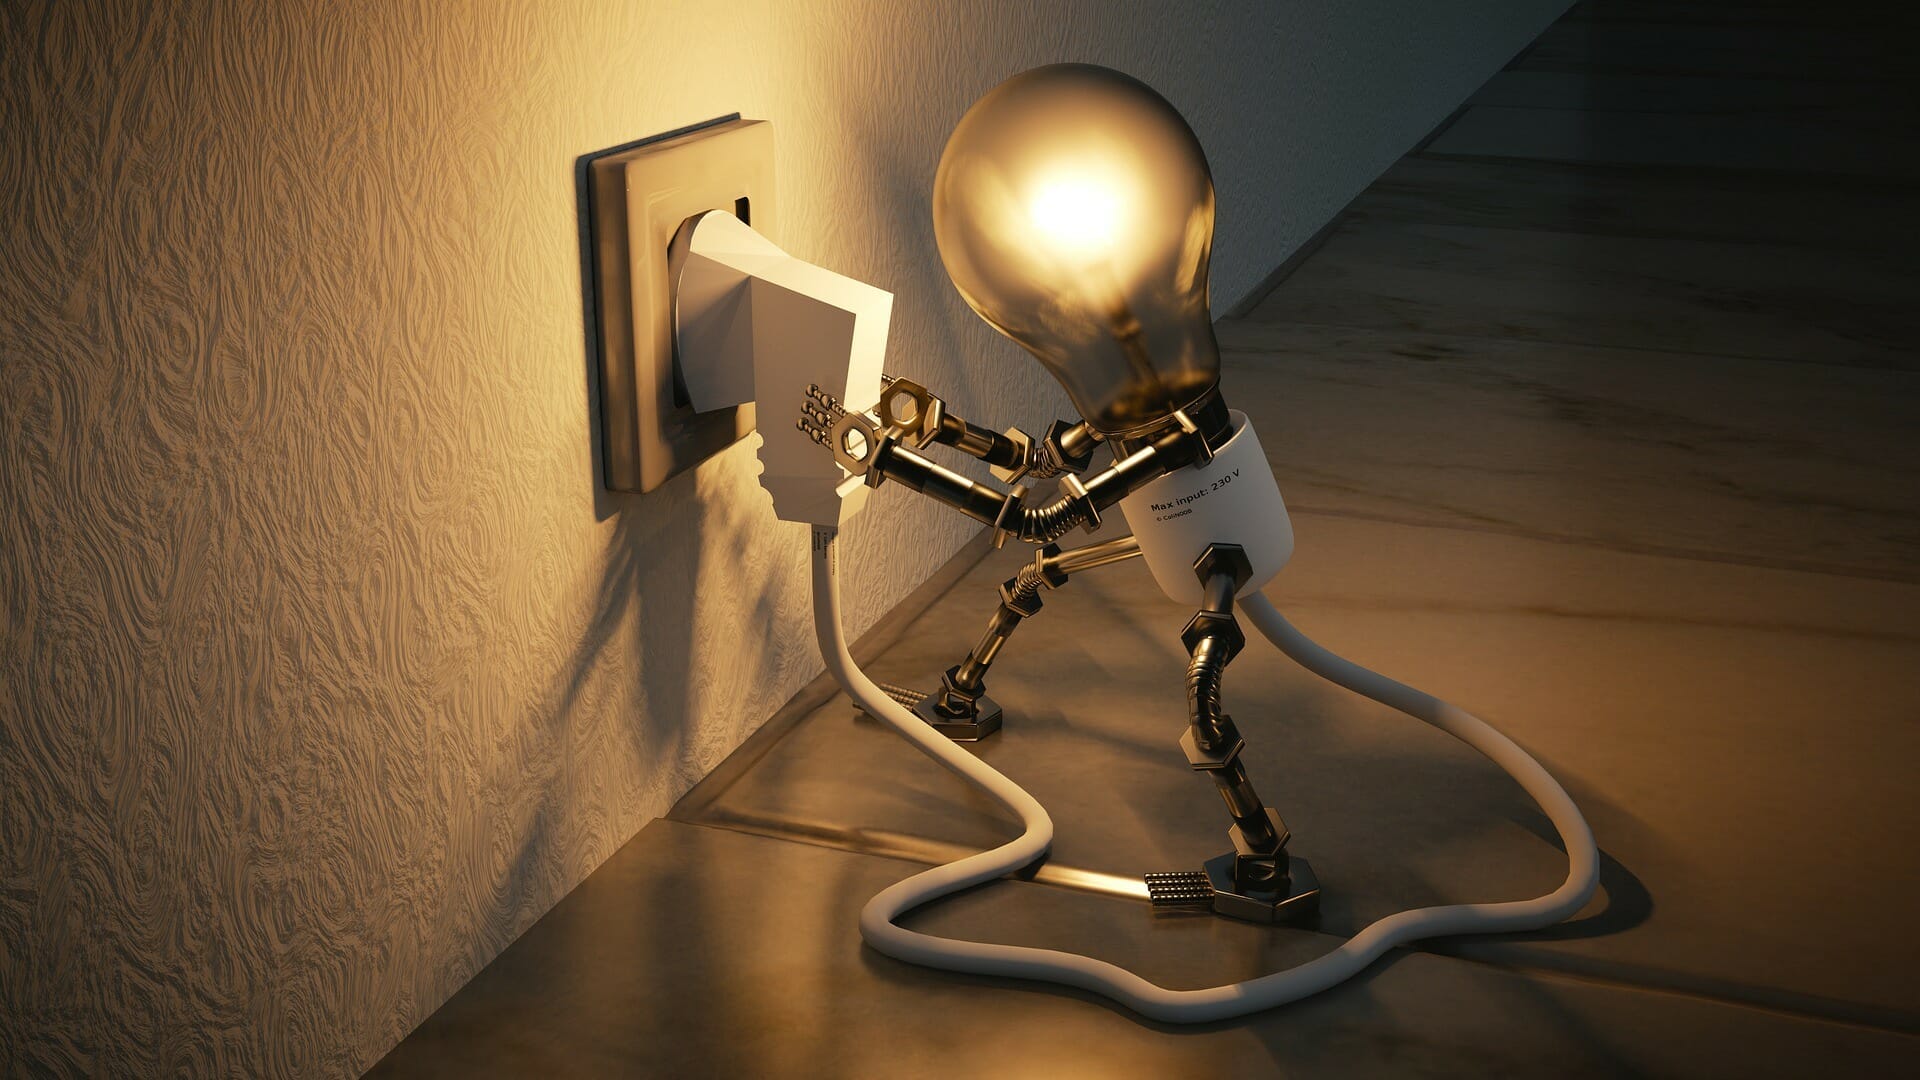 lightbulb with robotic legs and arms plugging itself to the outlet